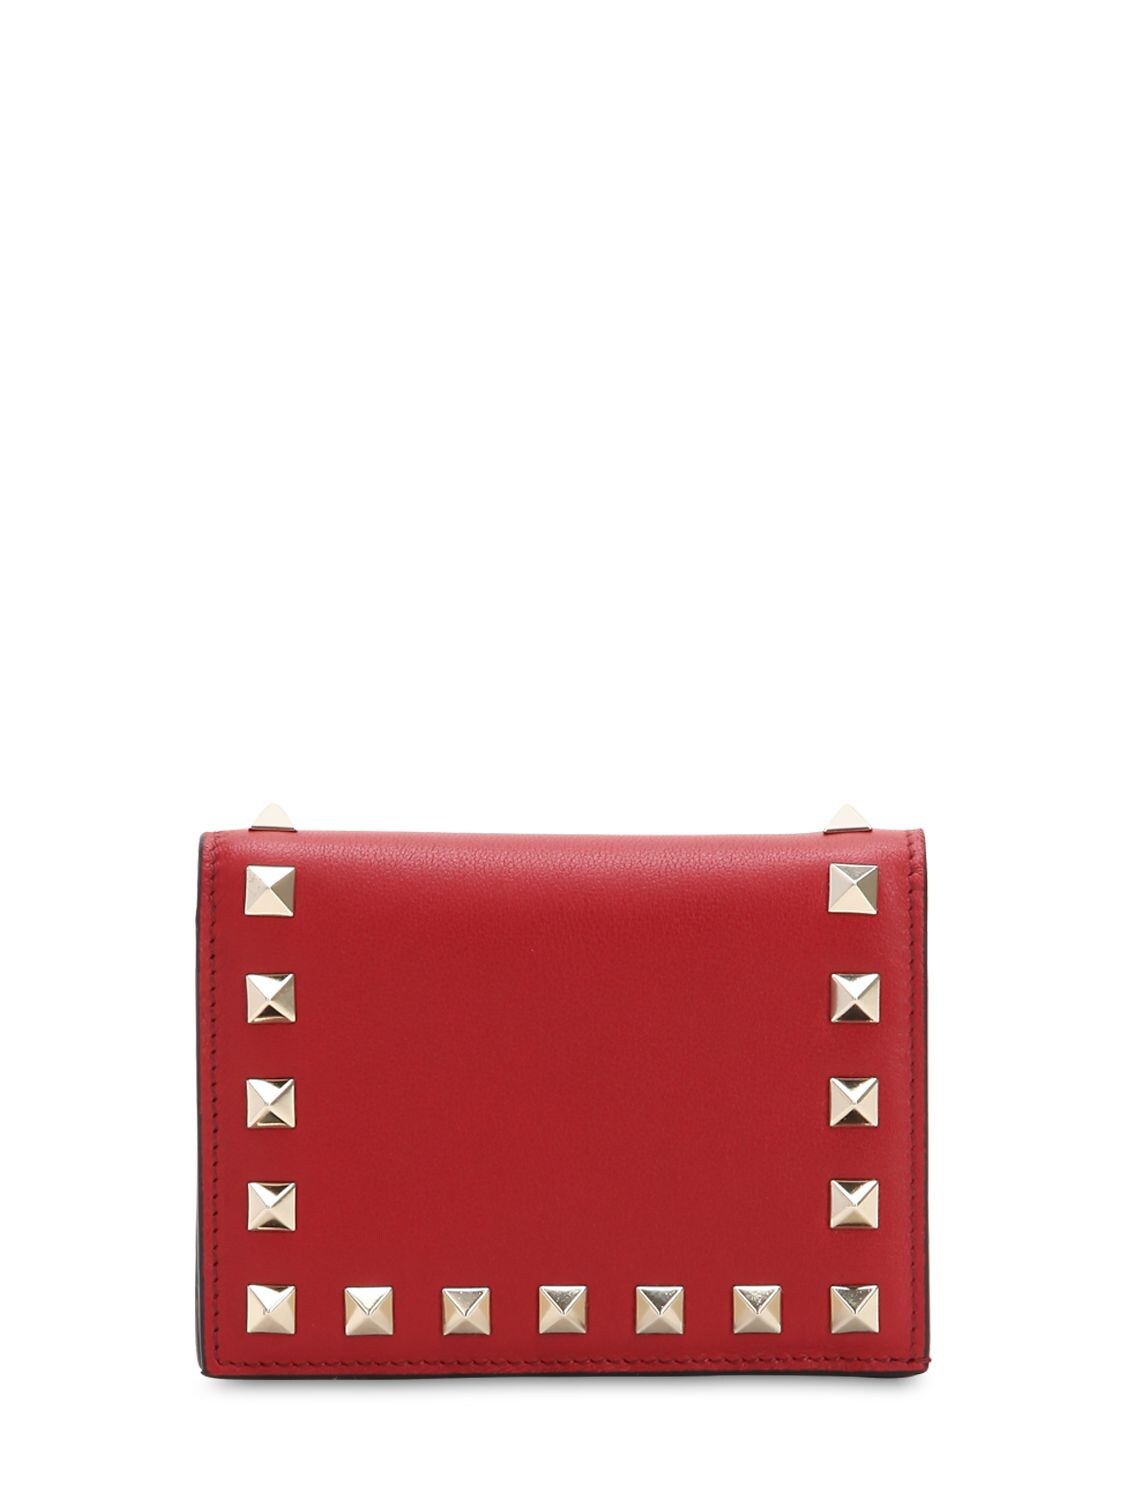 Valentino Garavani Rockstud Leather Compact Wallet In Rouge Pur